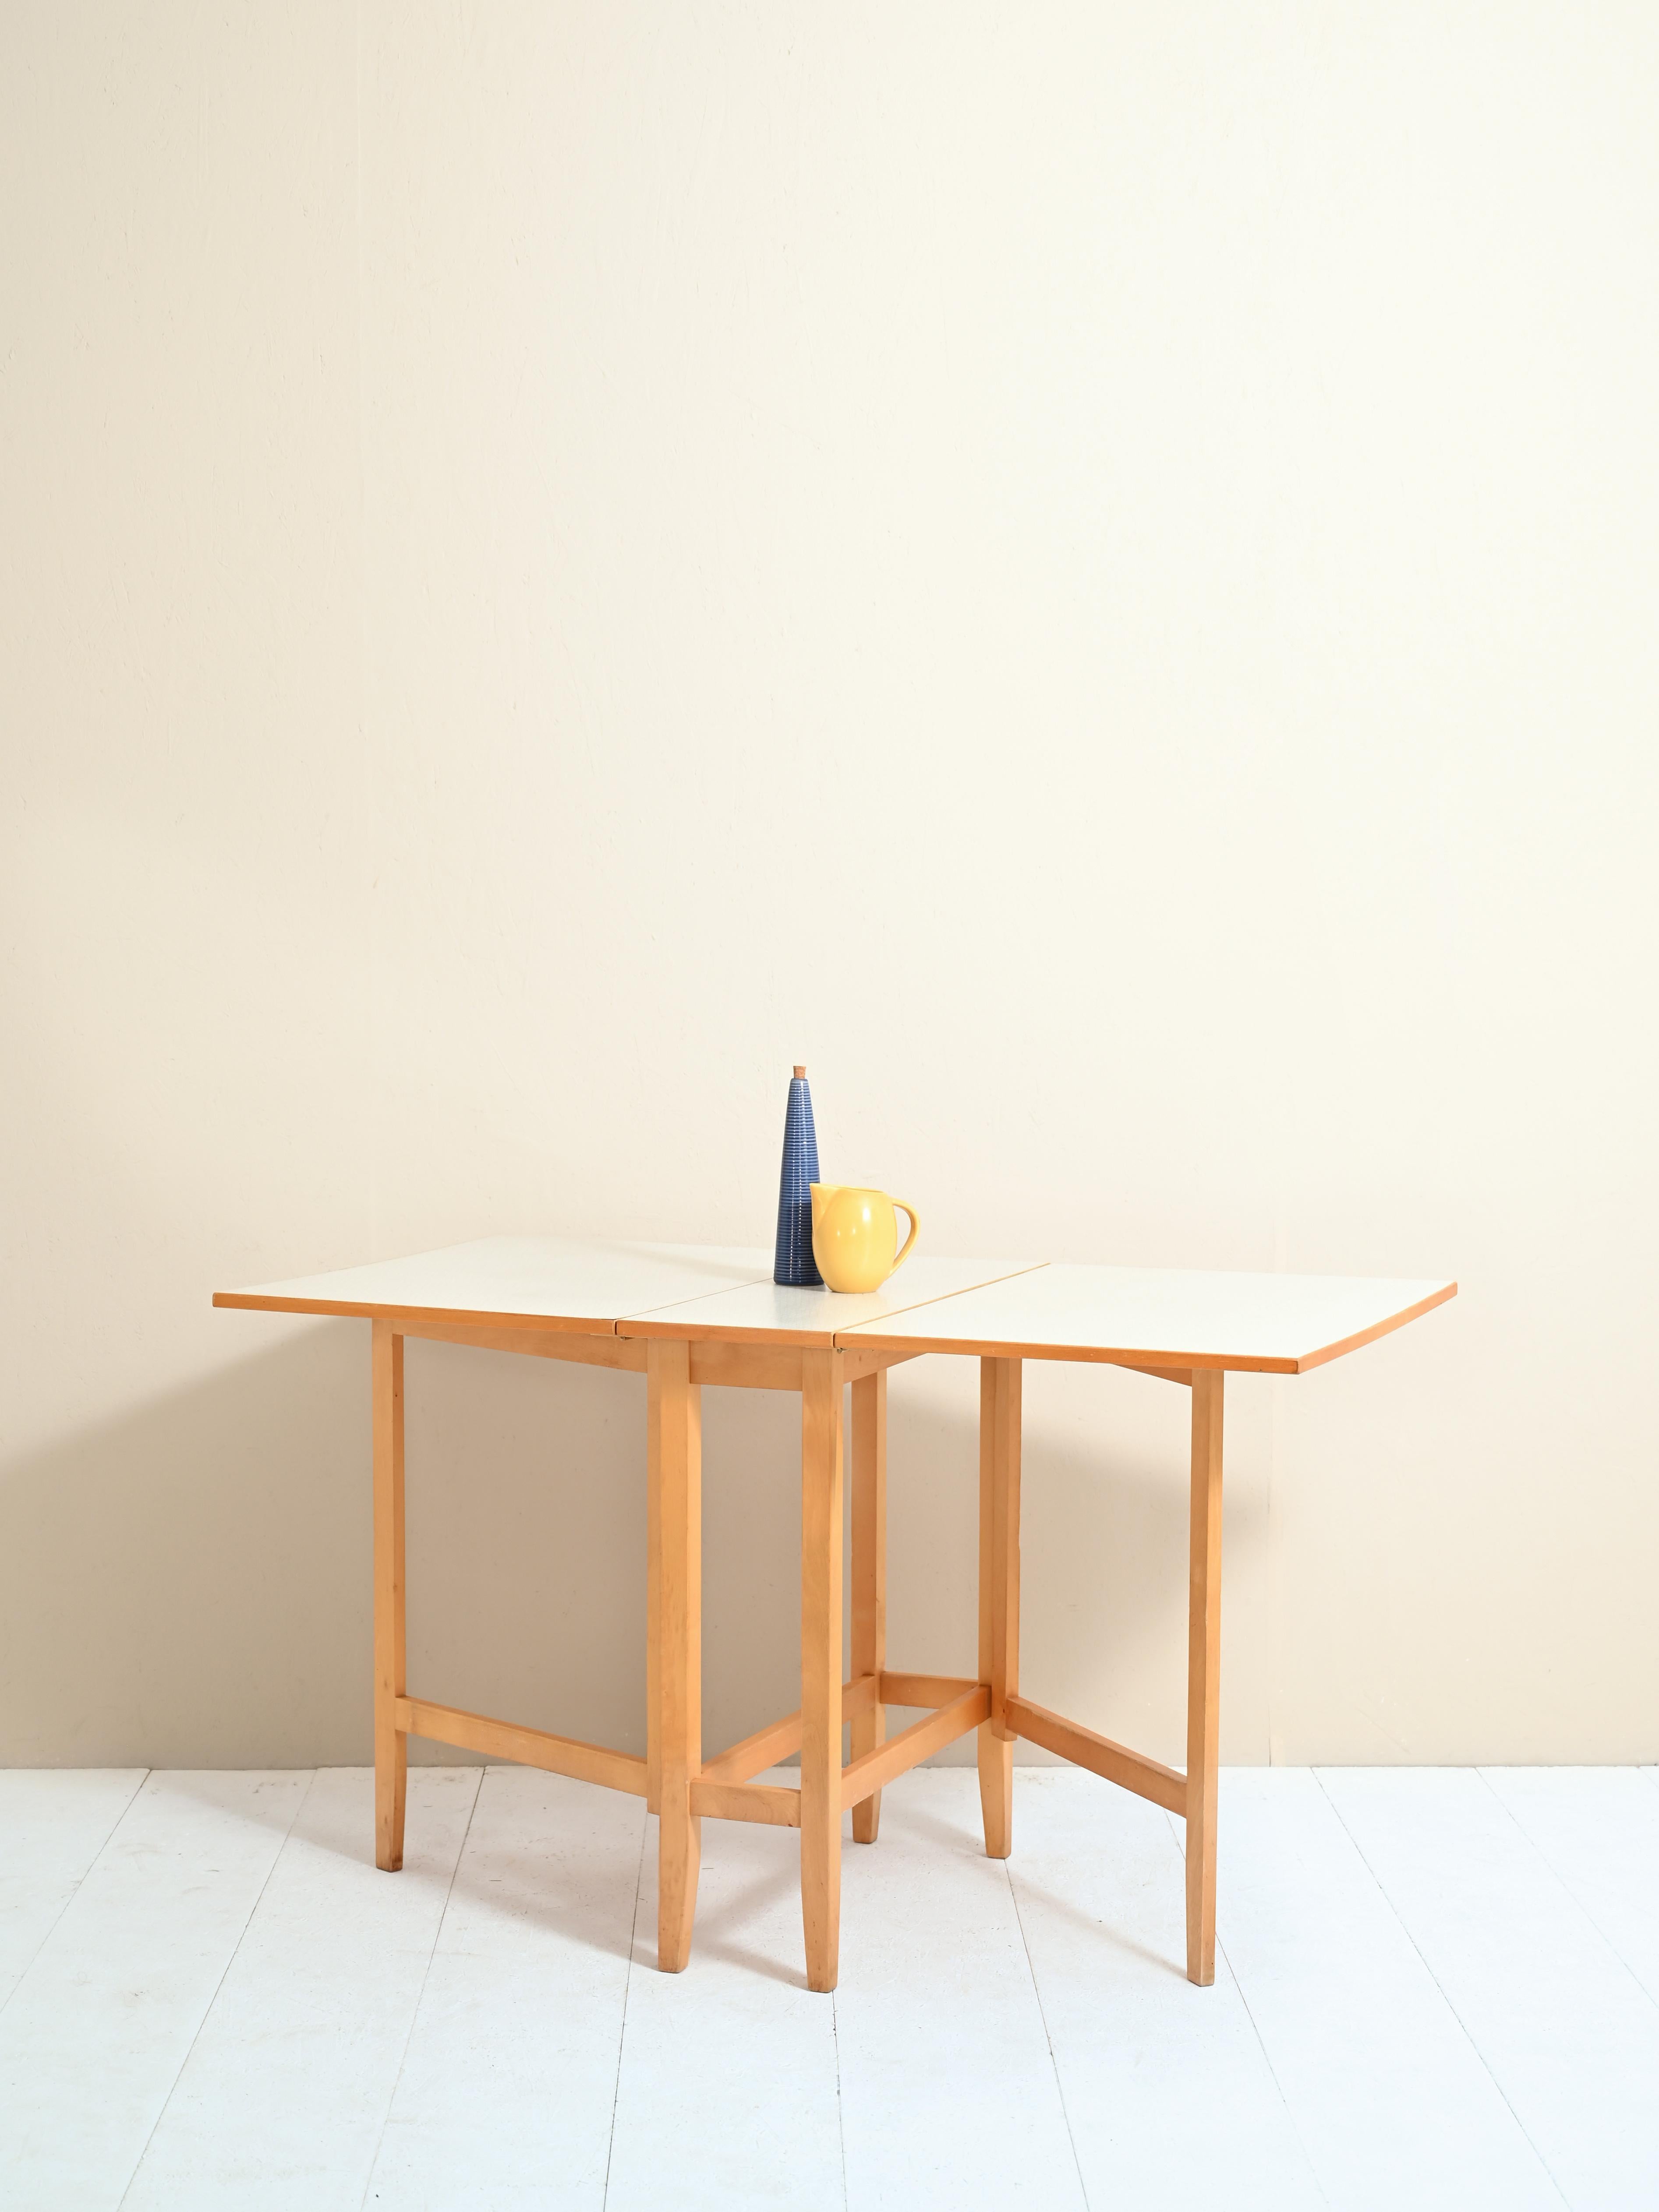 Scandinavian table made of wood and formica top.
This wing-opening model is called 'Slagbord' (translated to 'battle table') in Swedish,
A sturdy dining table extendable on both sides, which can comfortably seat 6
people. 

Dimensions:
Height